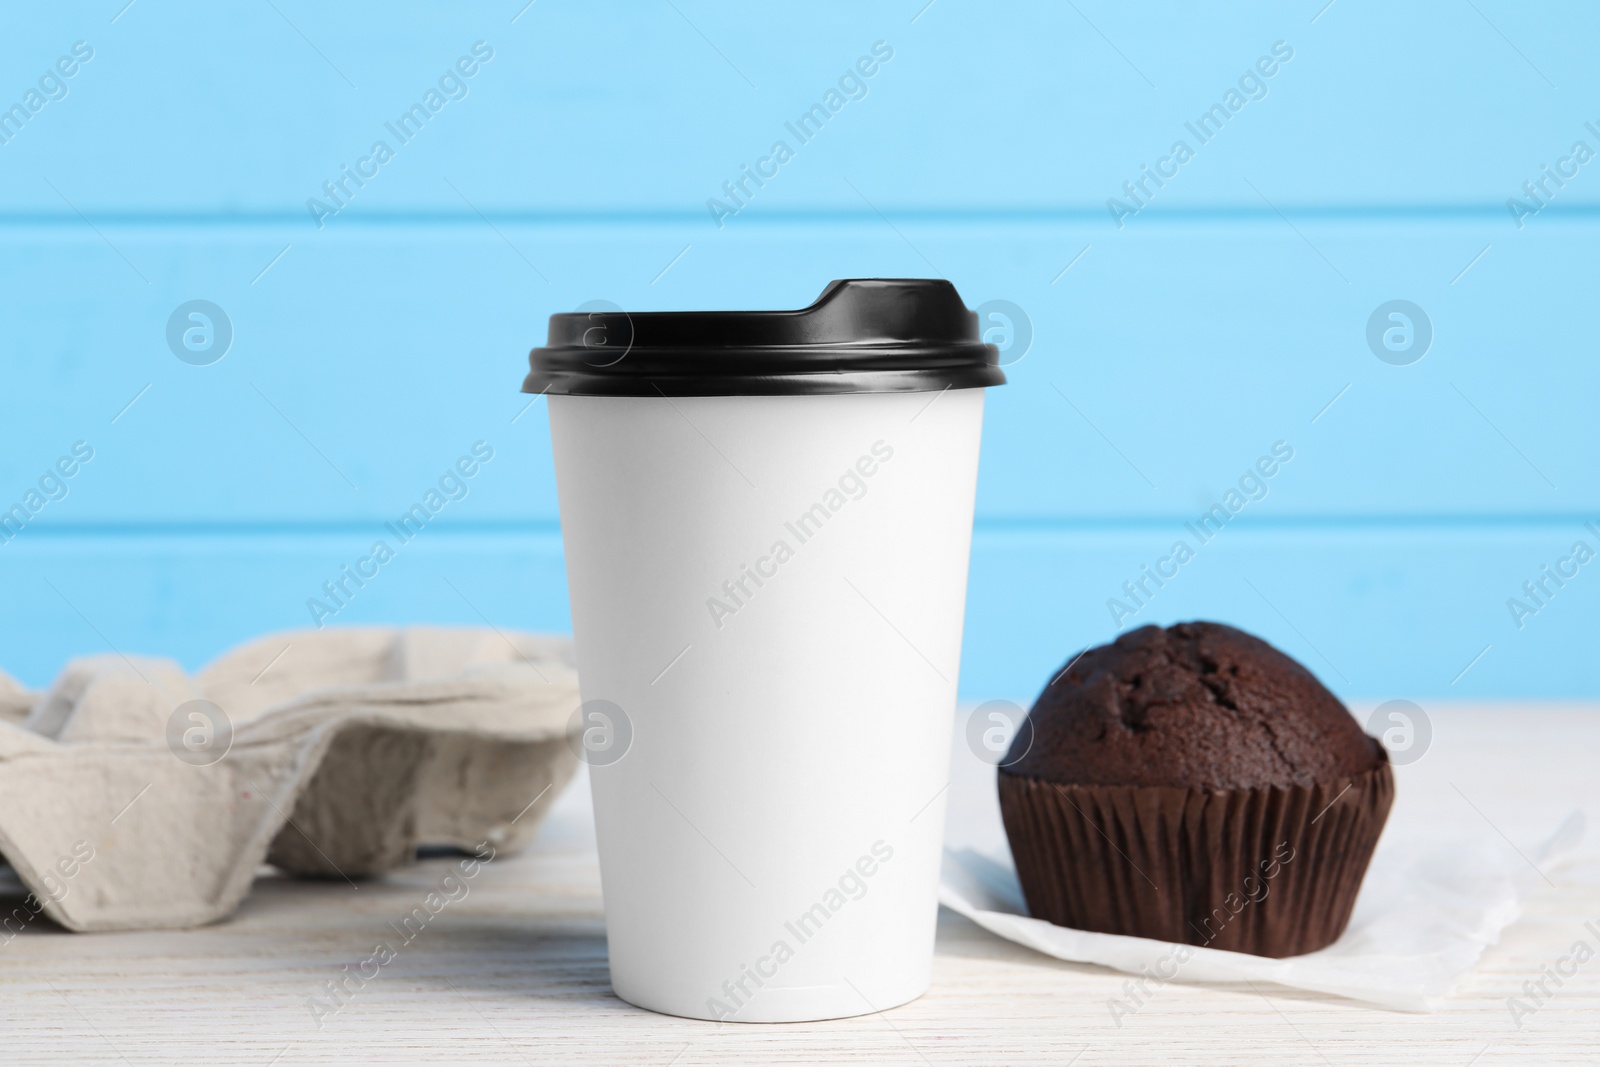 Photo of Paper cup with black lid and muffin on white wooden table. Coffee to go